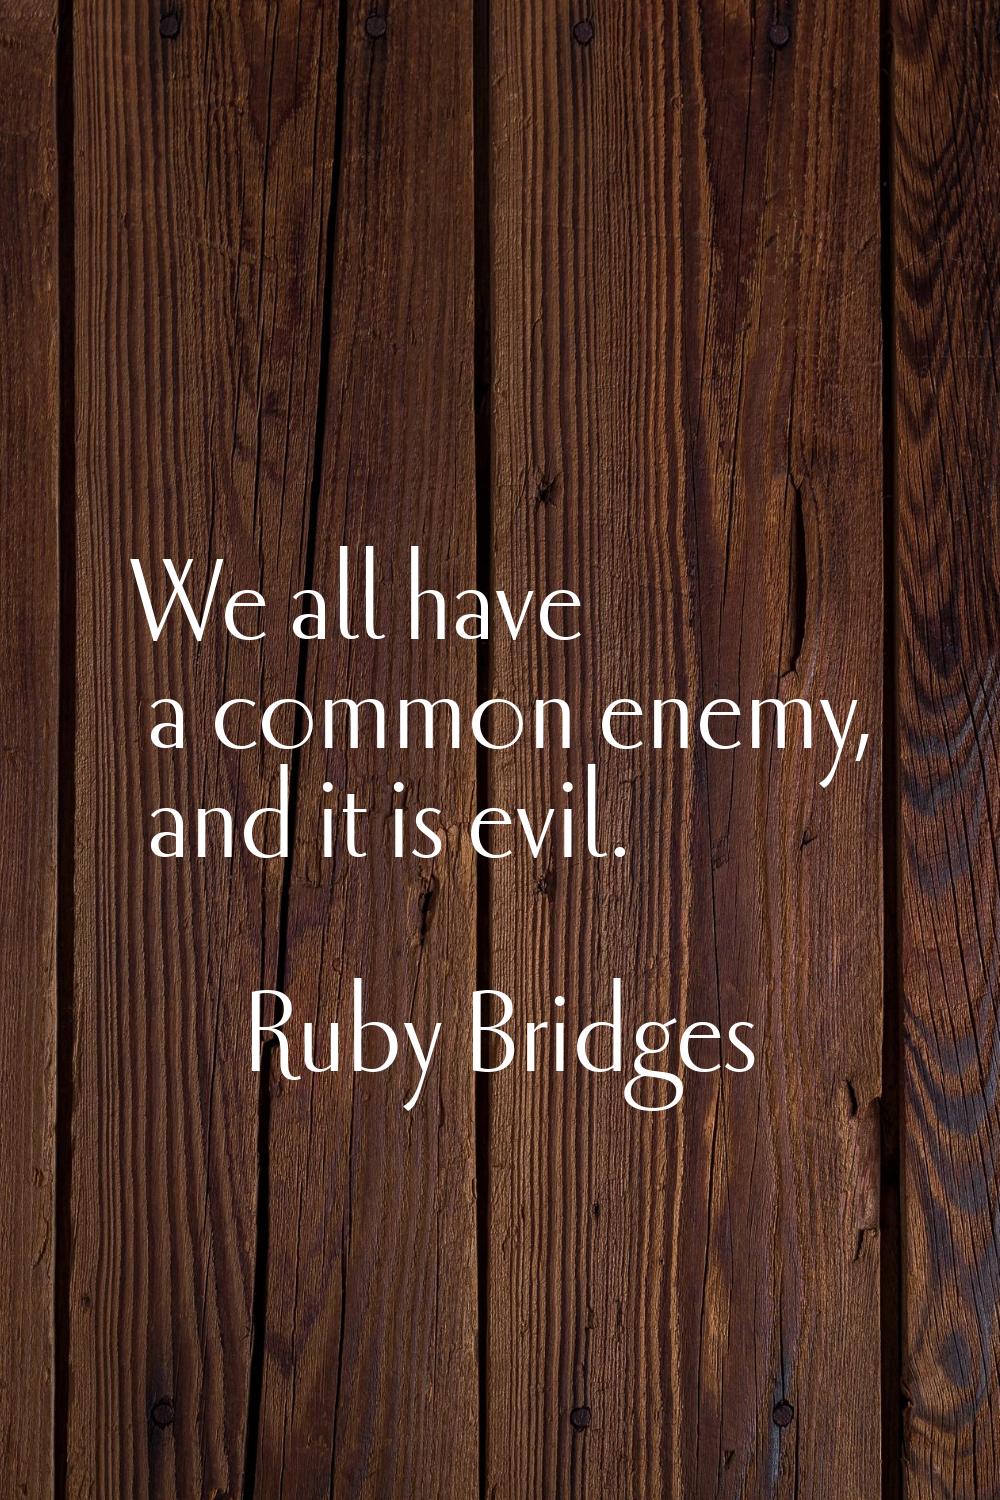 We all have a common enemy, and it is evil.